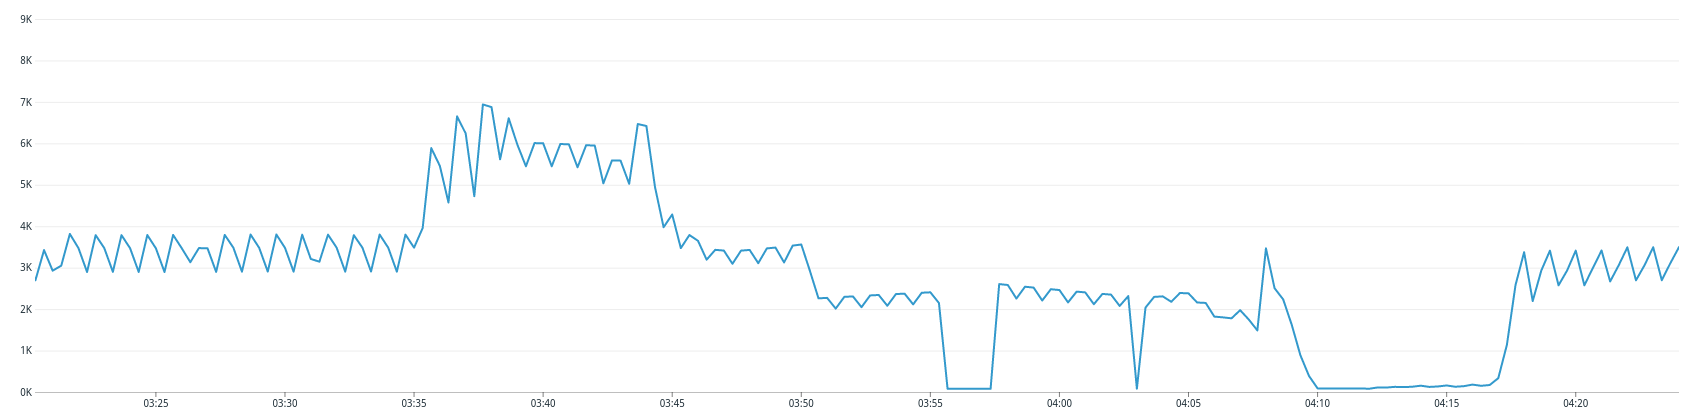 outage report graph cluster spike